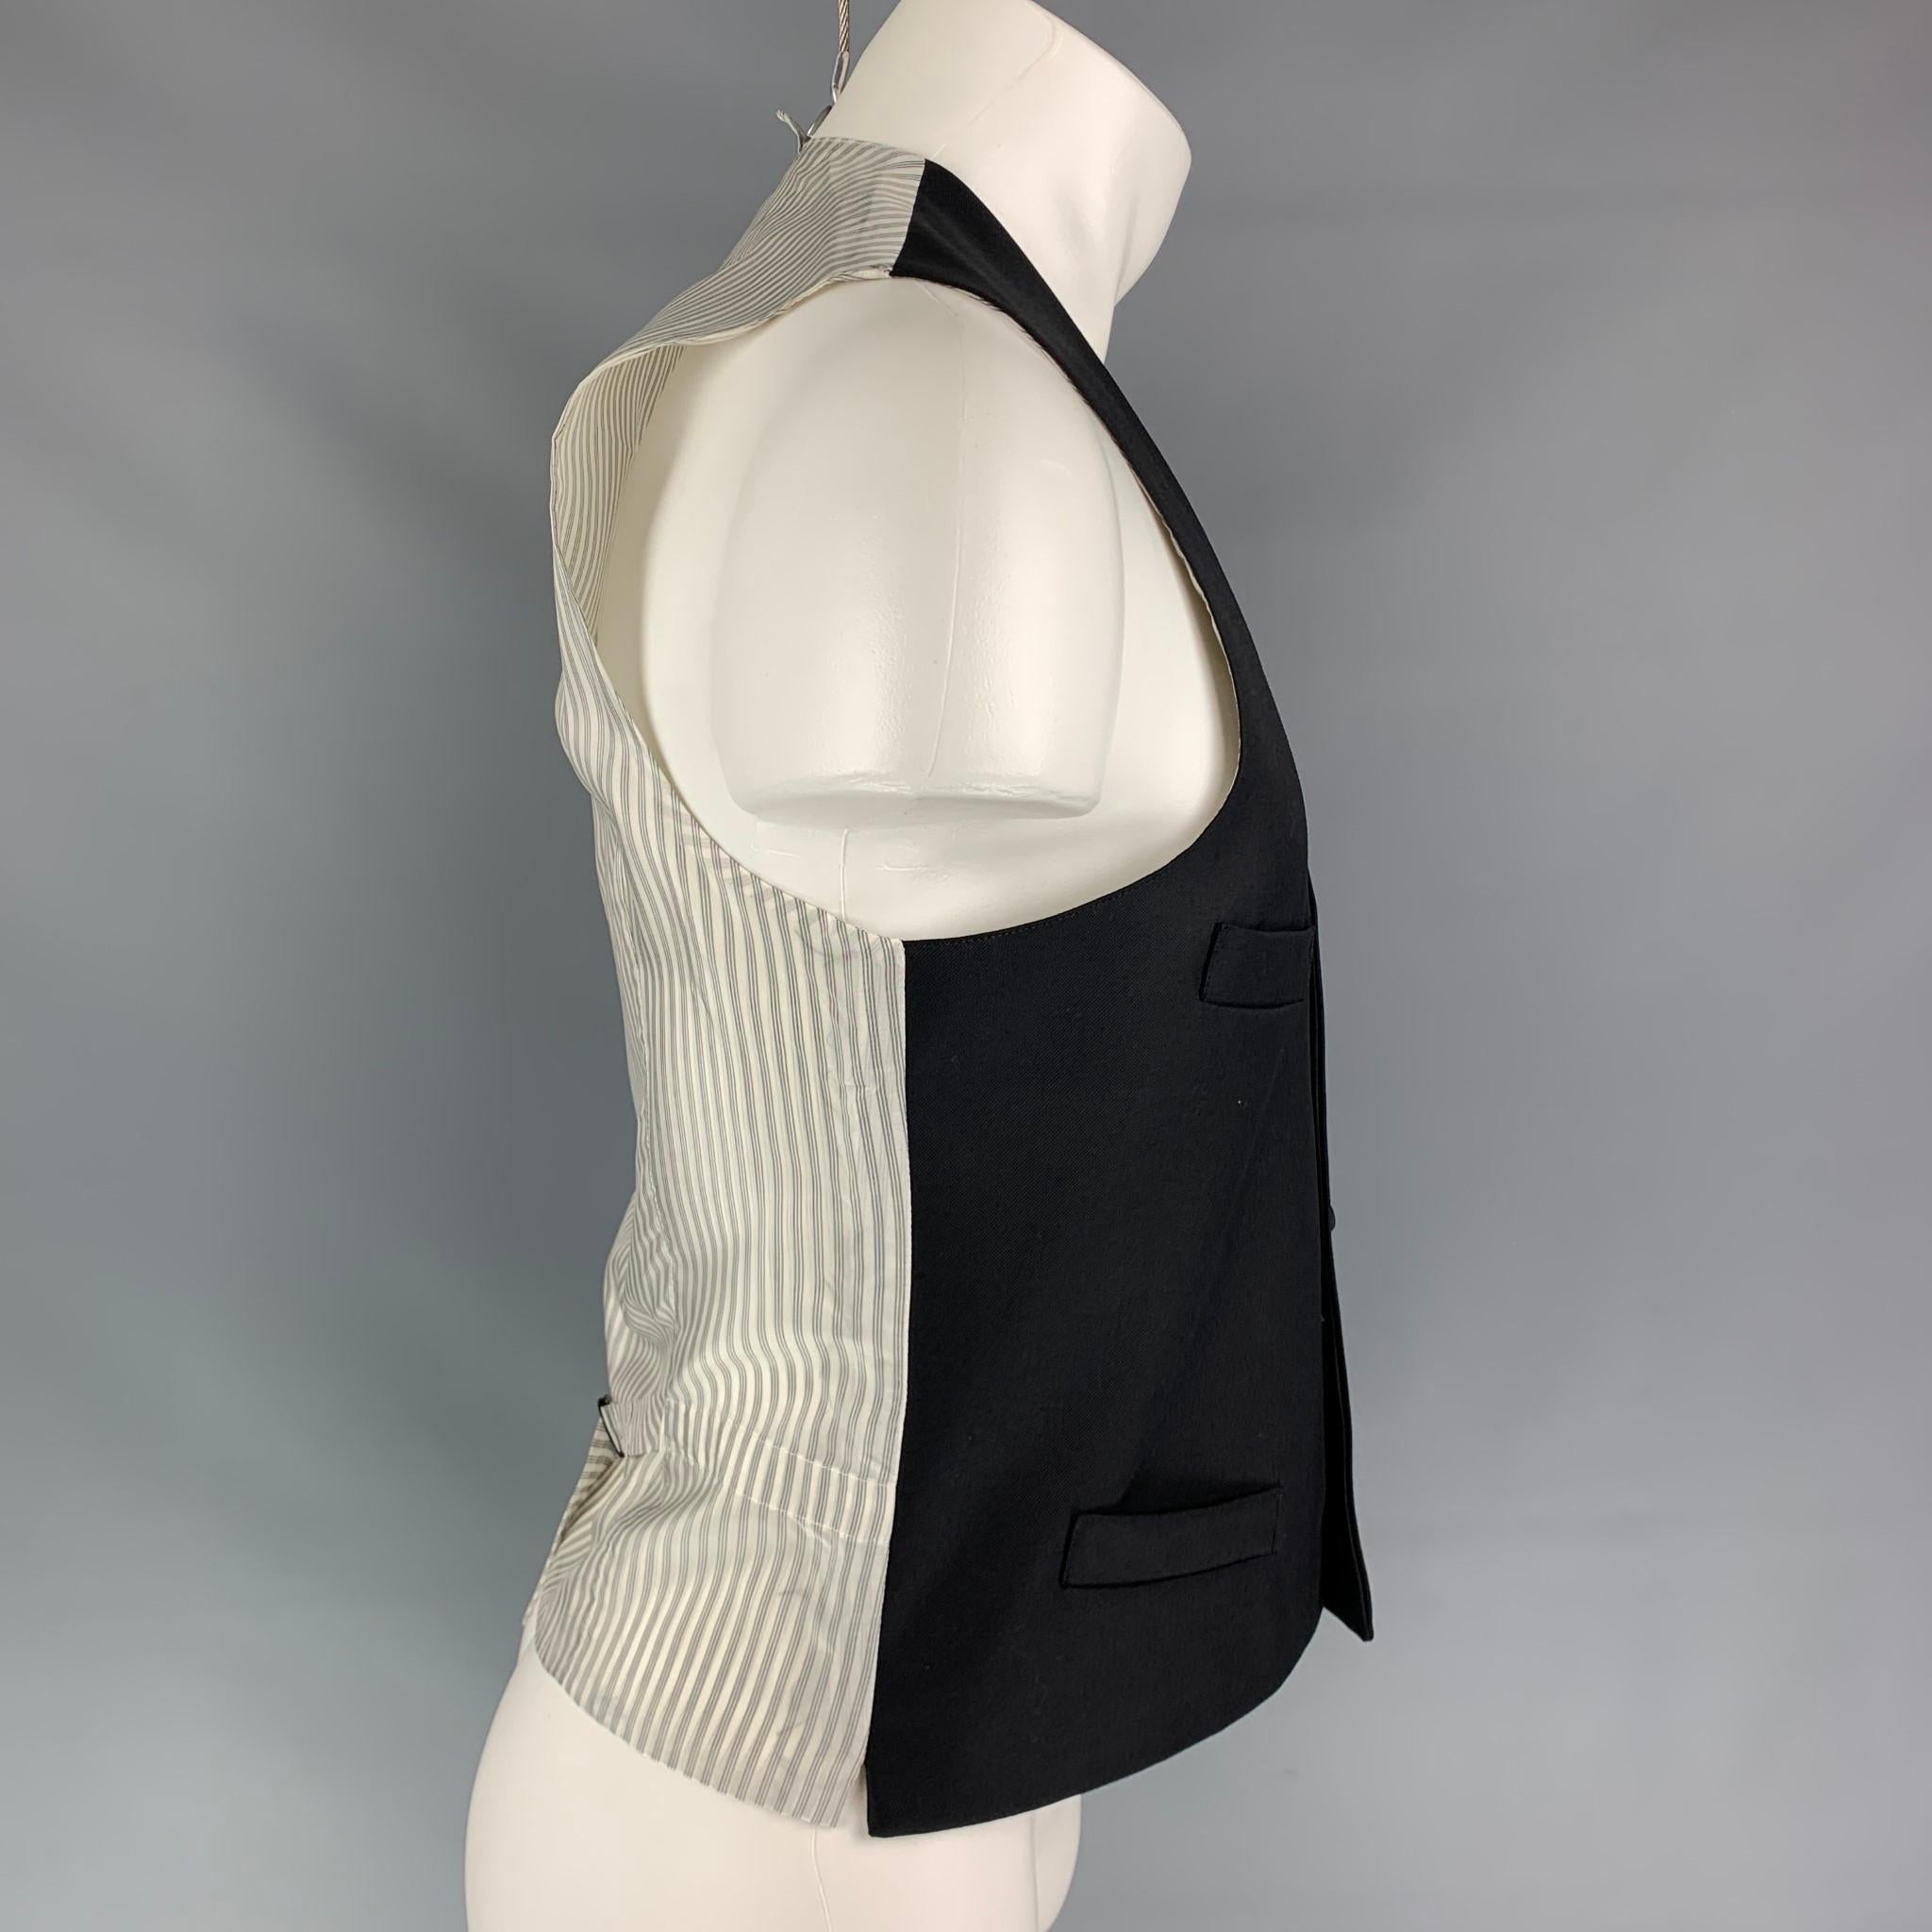 BLACK FLEECE vest comes in a black wool with a stripe back featuring a back belt, slit pockets, and a buttoned closure. Made in USA. 

Very Good Pre-Owned Condition.
Marked: BB1

Measurements:

Shoulder: 13.5 in.
Chest: 38 in.
Length: 23 in. 